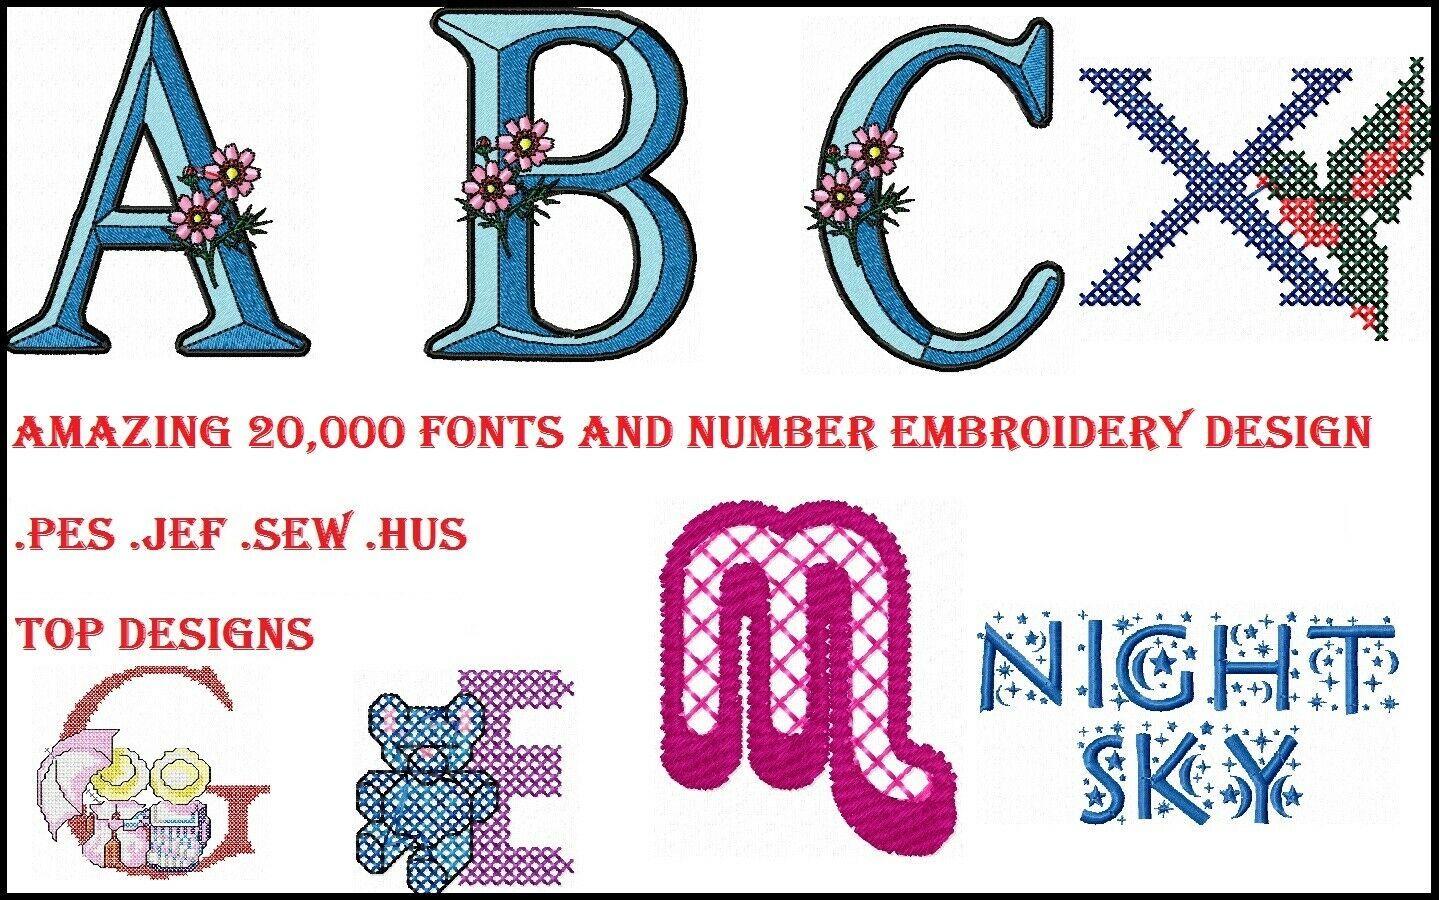 20,000 Fonts & Numbers Machine Embroidery Pattern Designs HUS PES JEF SEW - $27.99